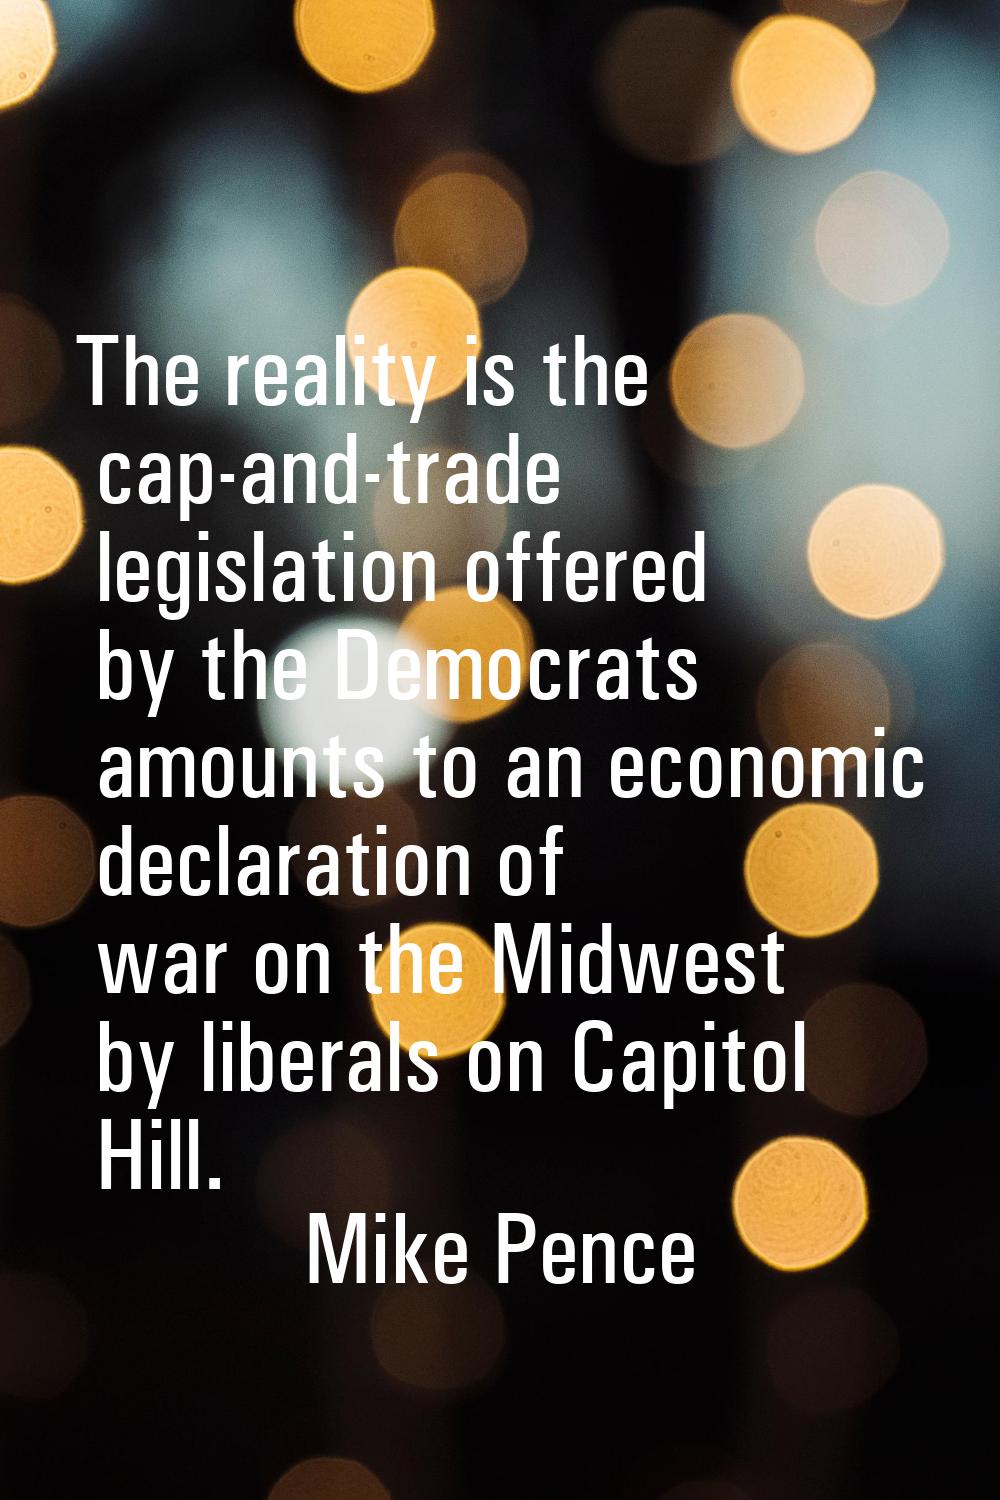 The reality is the cap-and-trade legislation offered by the Democrats amounts to an economic declar